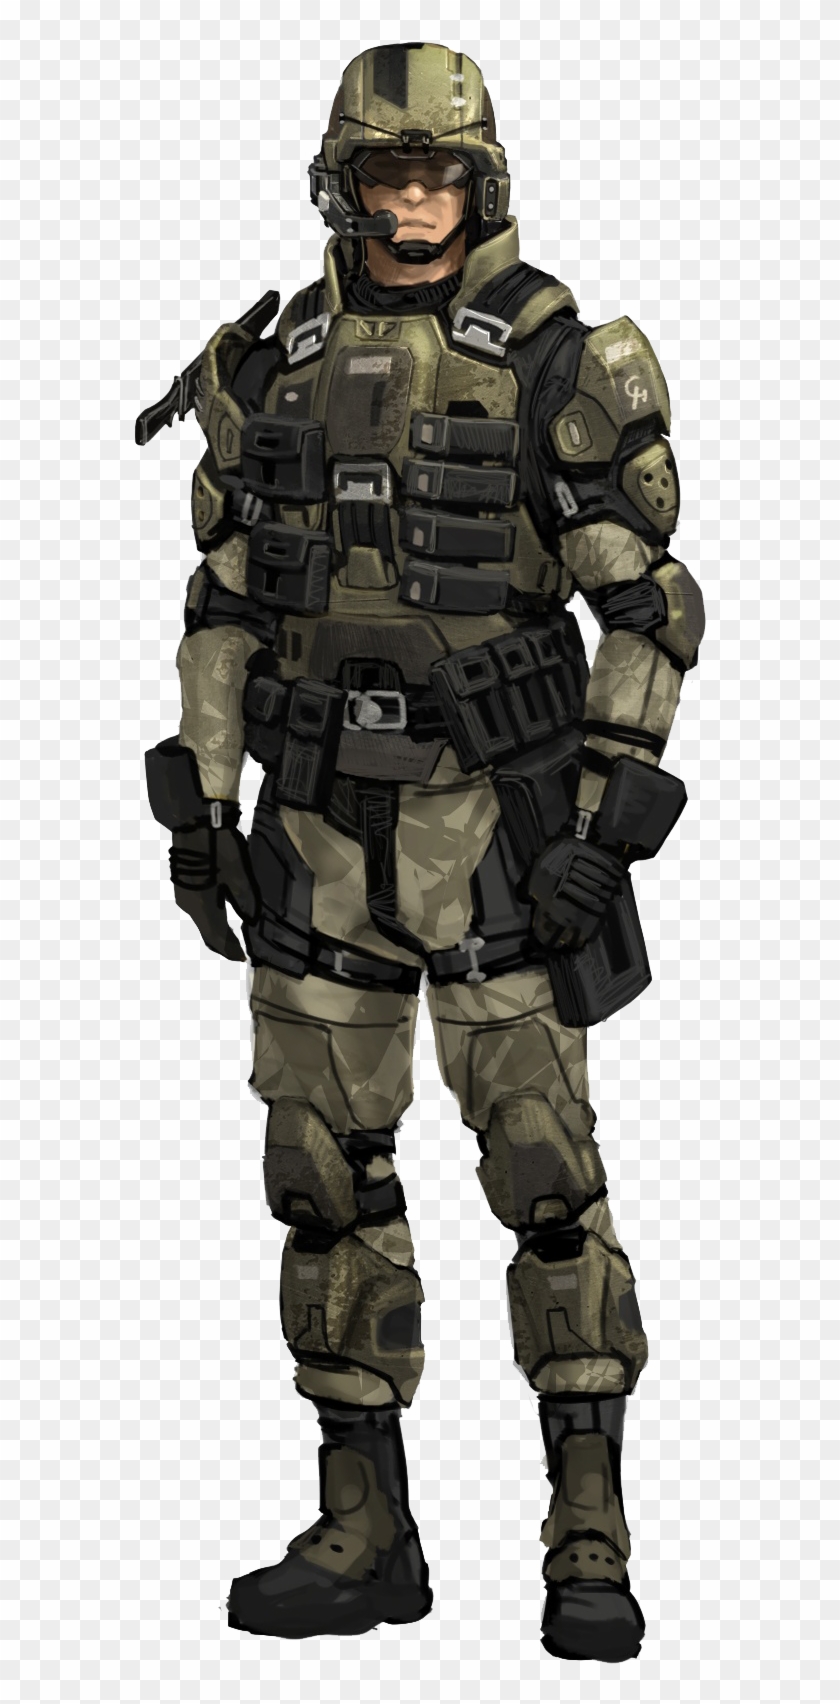 Halo 3 Unsc Marine, HD Png Download - 602x1214(#2211931) - PngFind